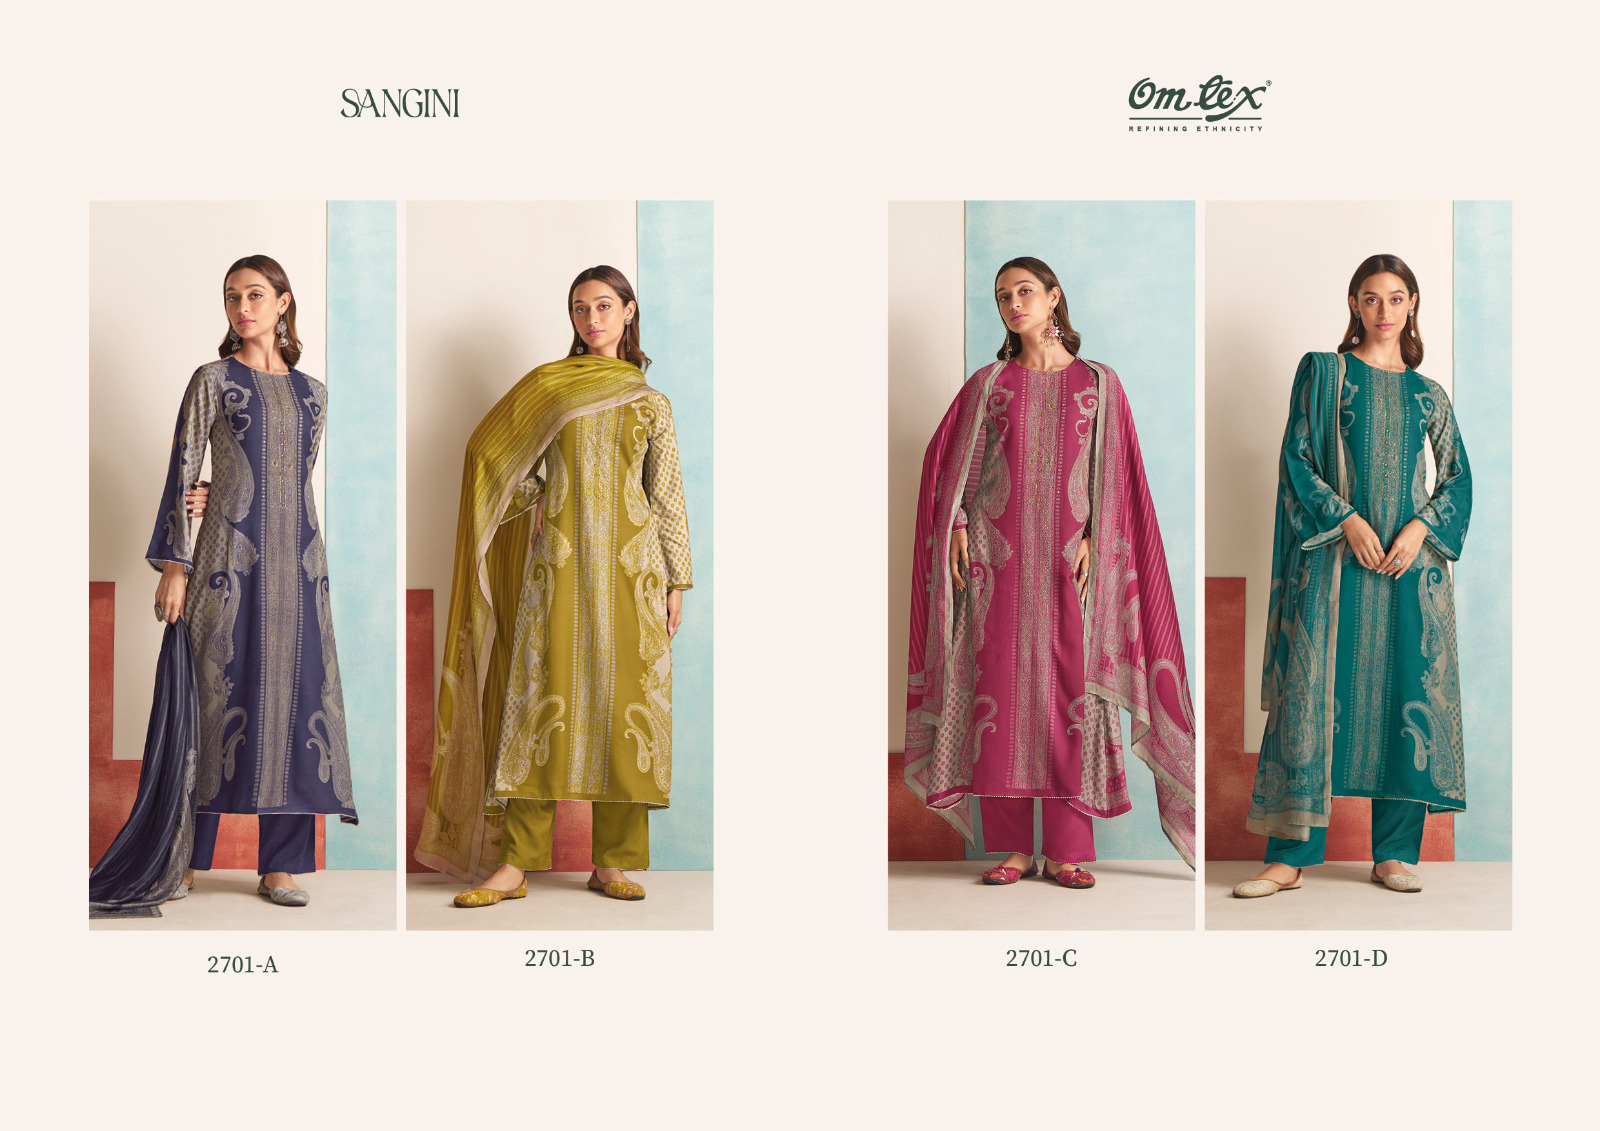 Omtex Sangini collection 3